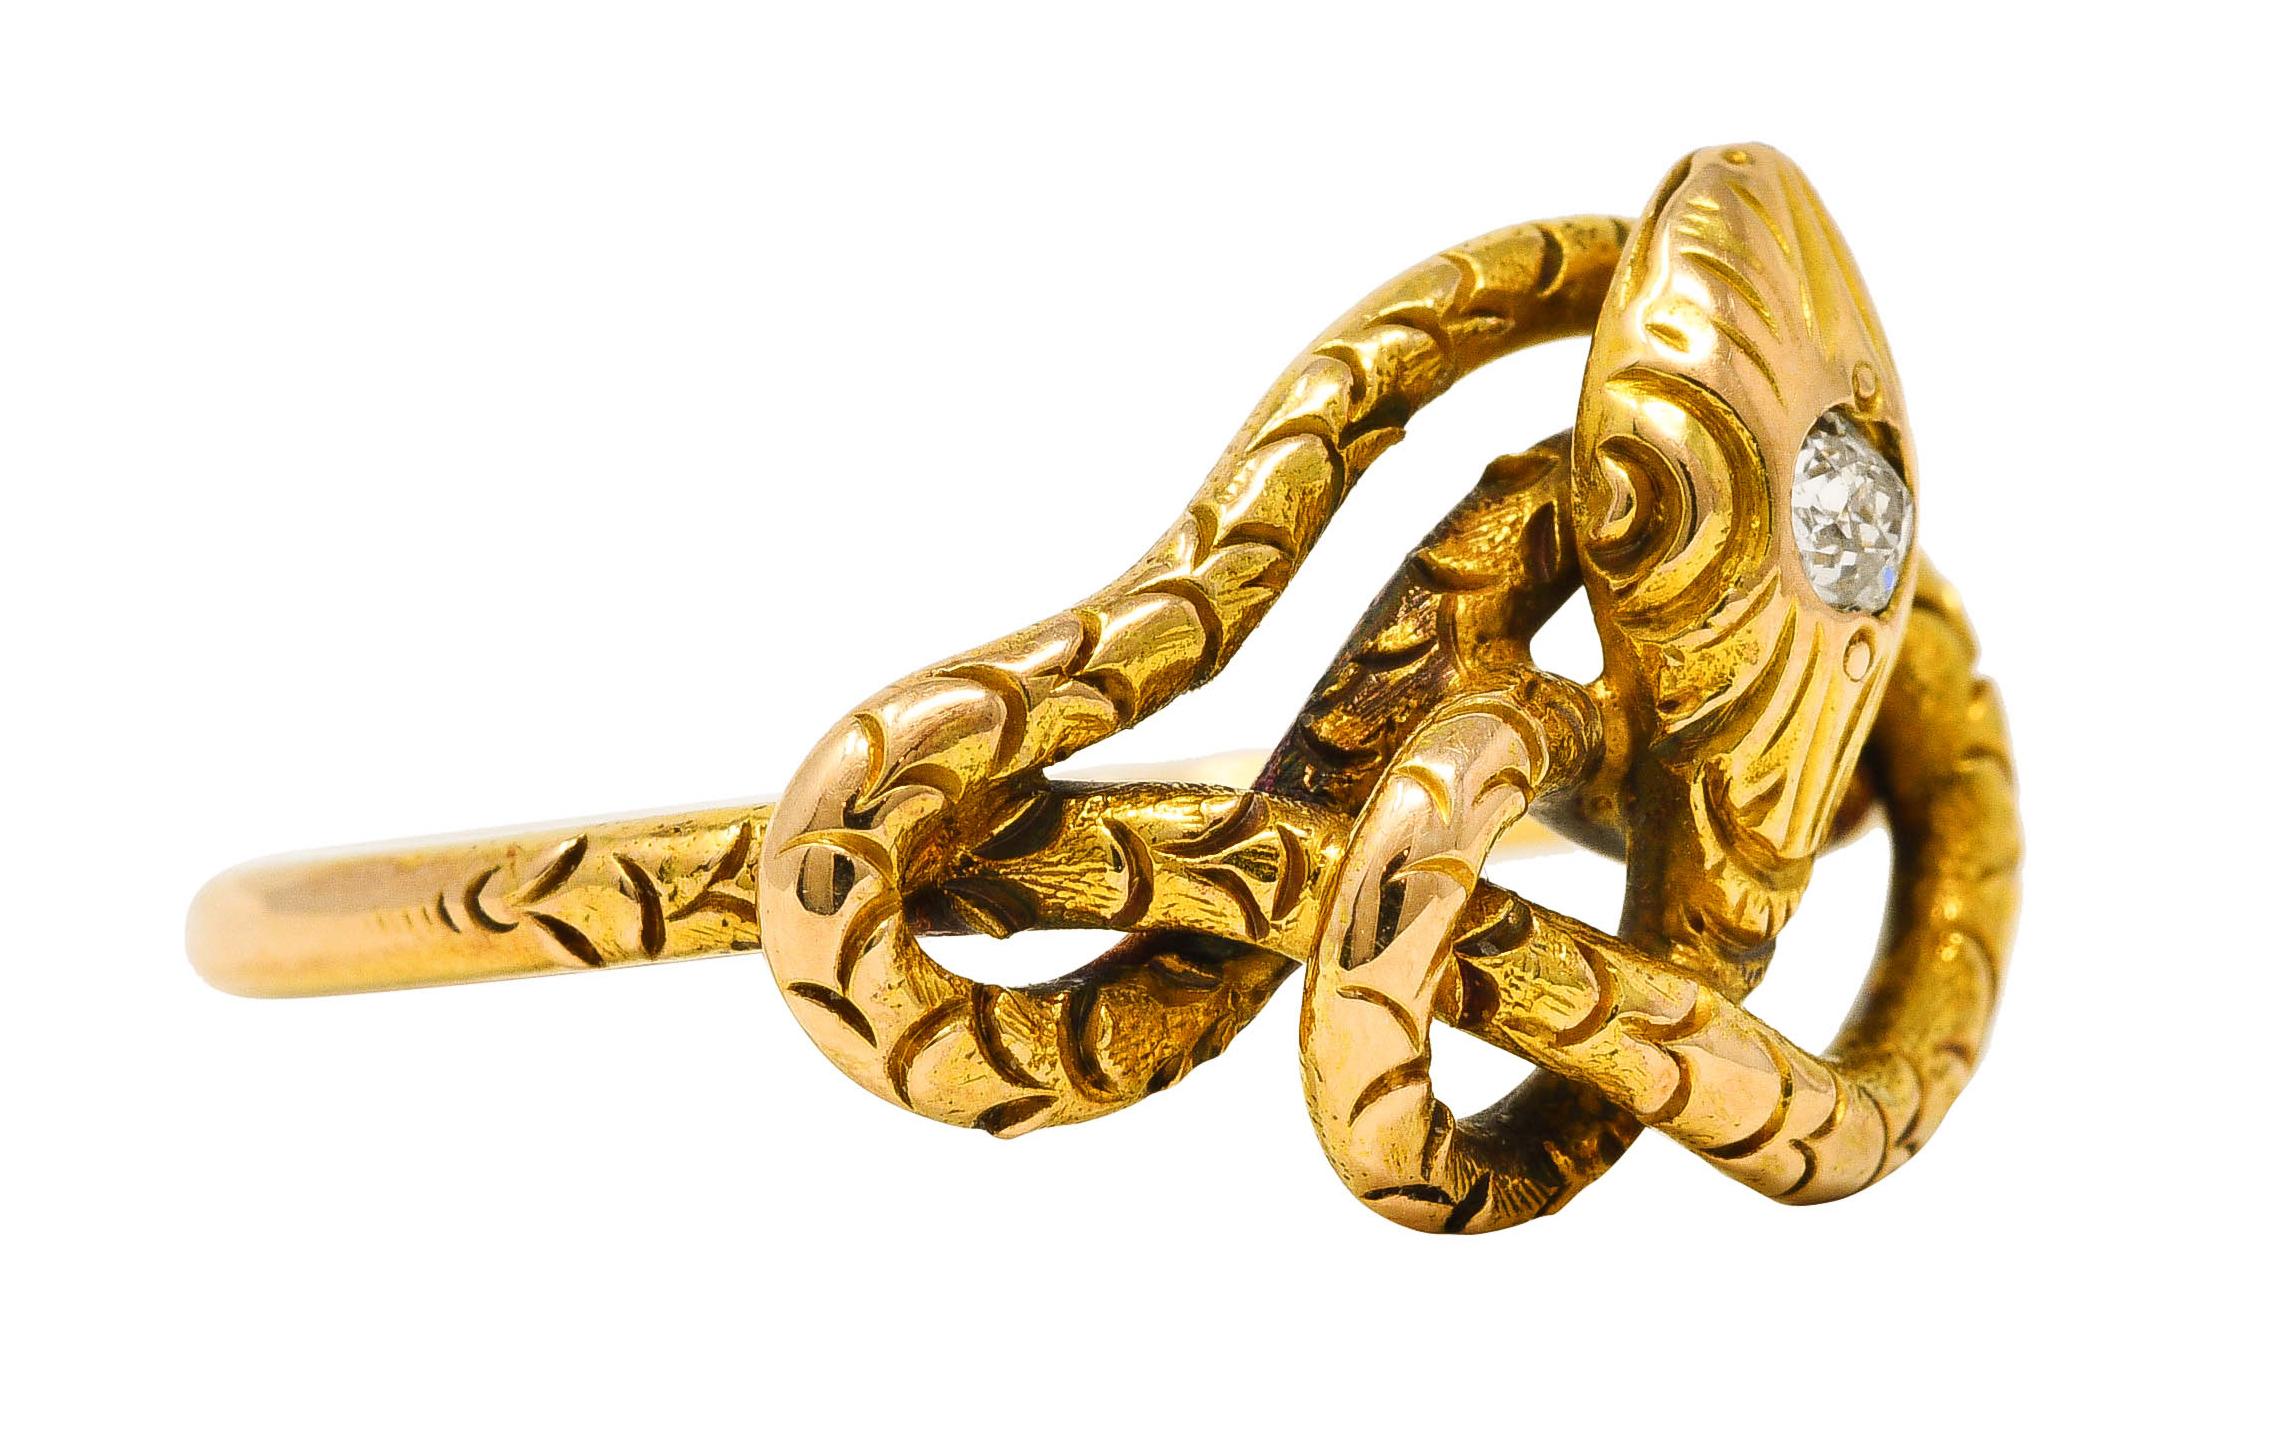 Ring is designed as a coiled snake with engraved scale pattern throughout

Featuring an old mine cut diamond flush set in snake head - eye clean and bright

Stamped 14k for 14 karat gold

Circa: 1880s

Ring size: 7 and sizable

Measures North to